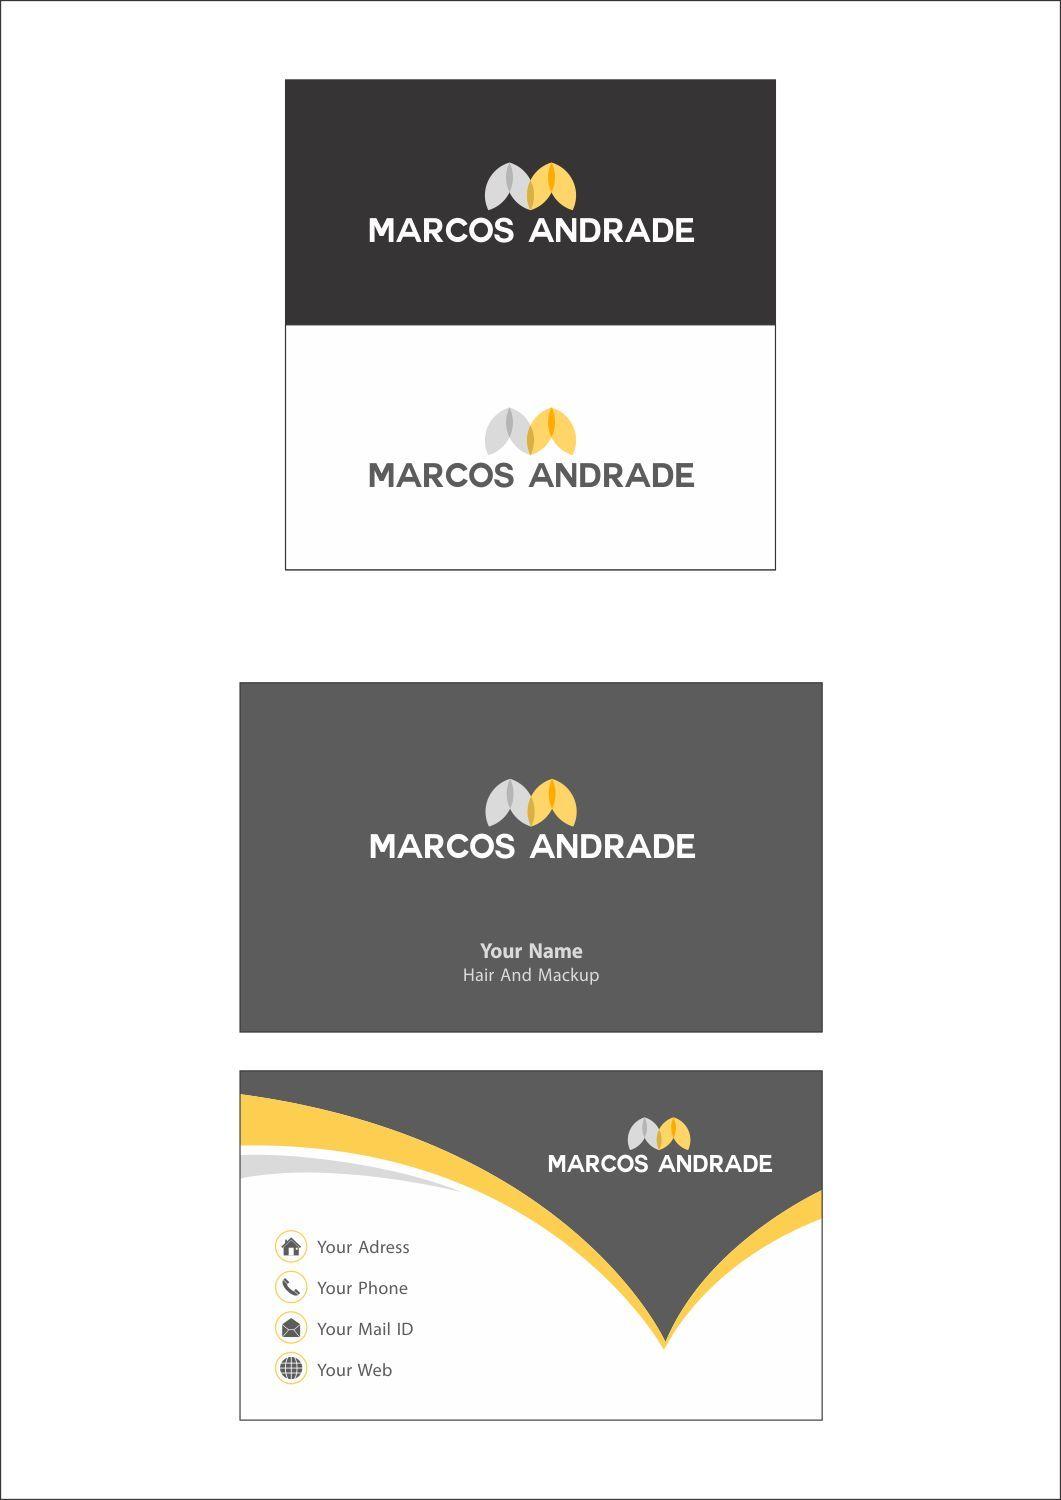 Marcos Name Logo - Modern, Conservative, Hair And Beauty Logo Design for Marcos Andrade